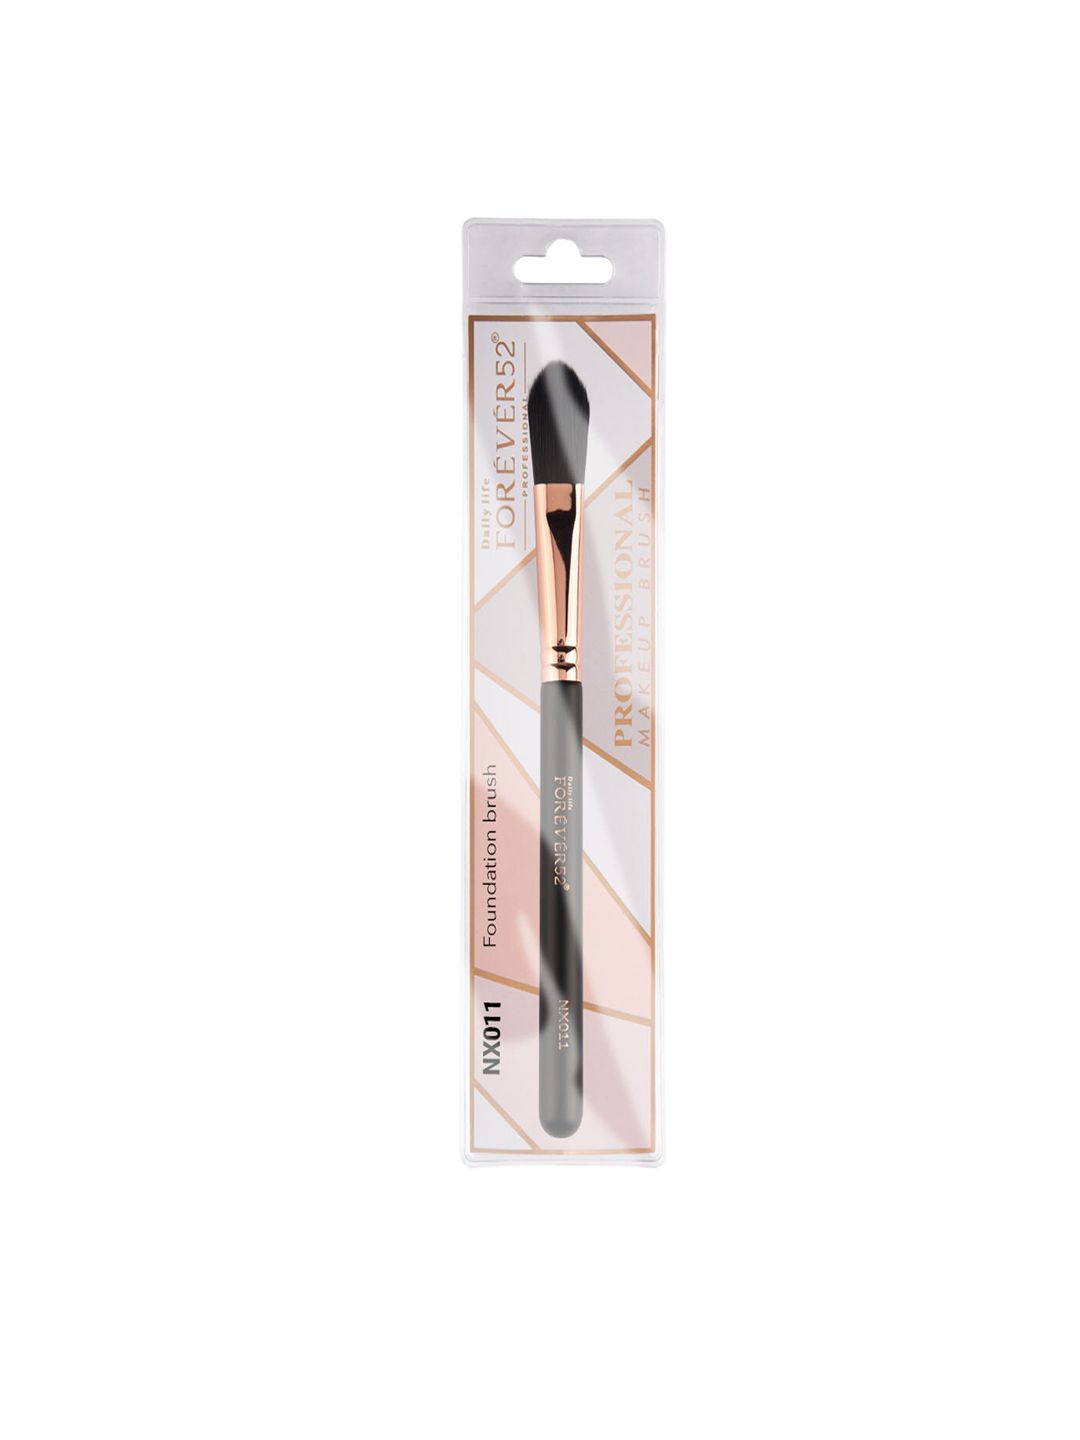 Daily Life Forever52 Foundation brush NX011 Price in India